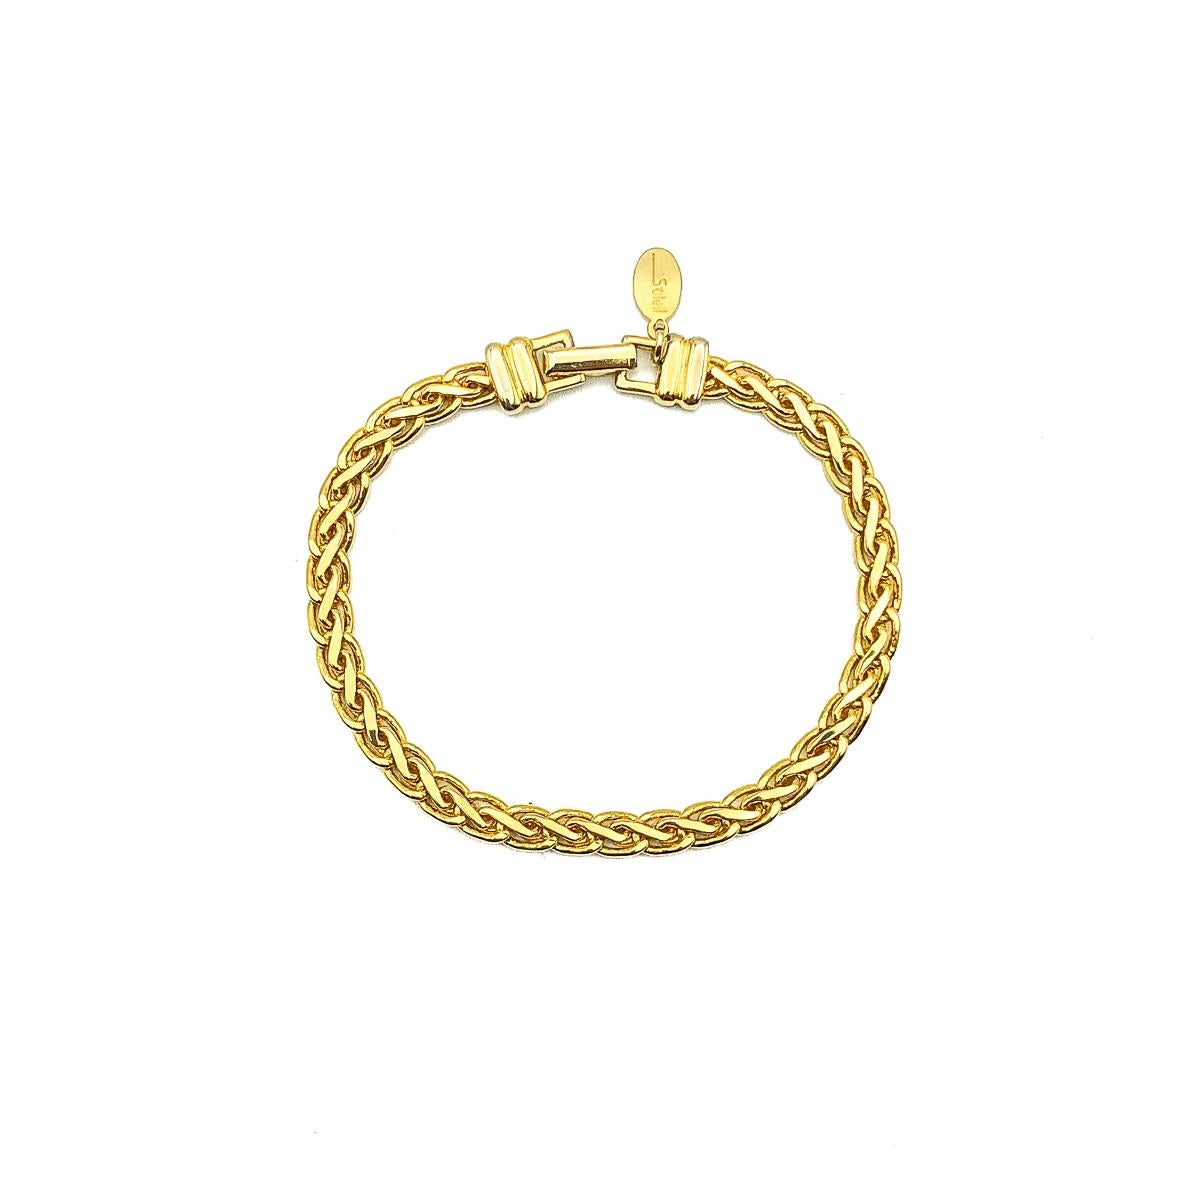 Vintage Soleil Chain Bracelet. Crafted in gold plated metal. Very good vintage condition, signed, 18cms. A perfect style staple. 

Established in 2016, this is a British brand that is already making a name for itself in the jewellery world both at